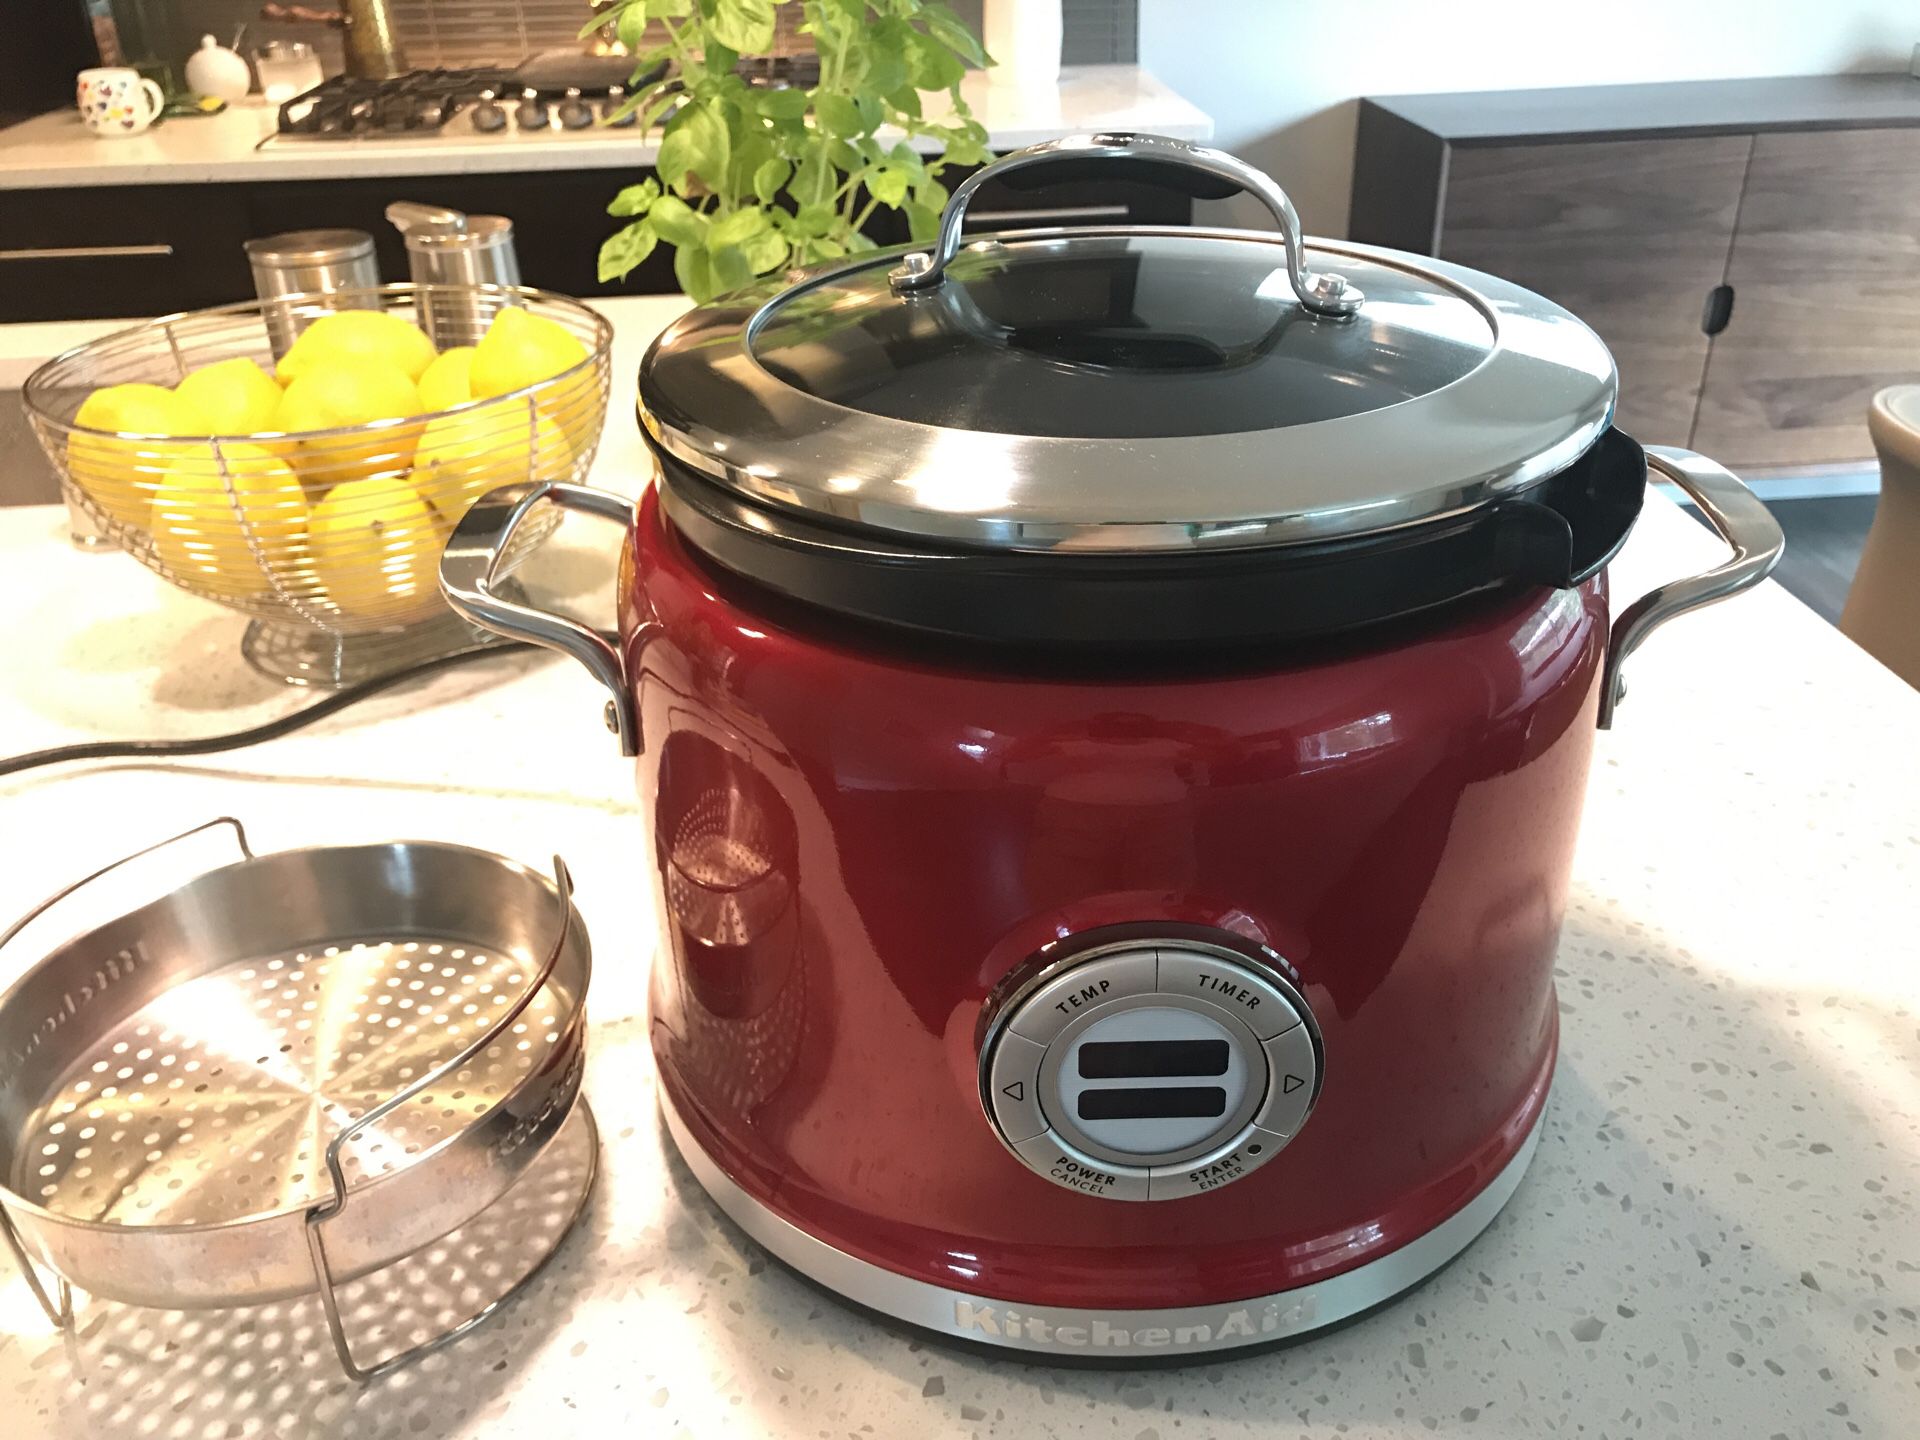 KitchenAid Multi Cooker for Sale in Bothell, WA - OfferUp